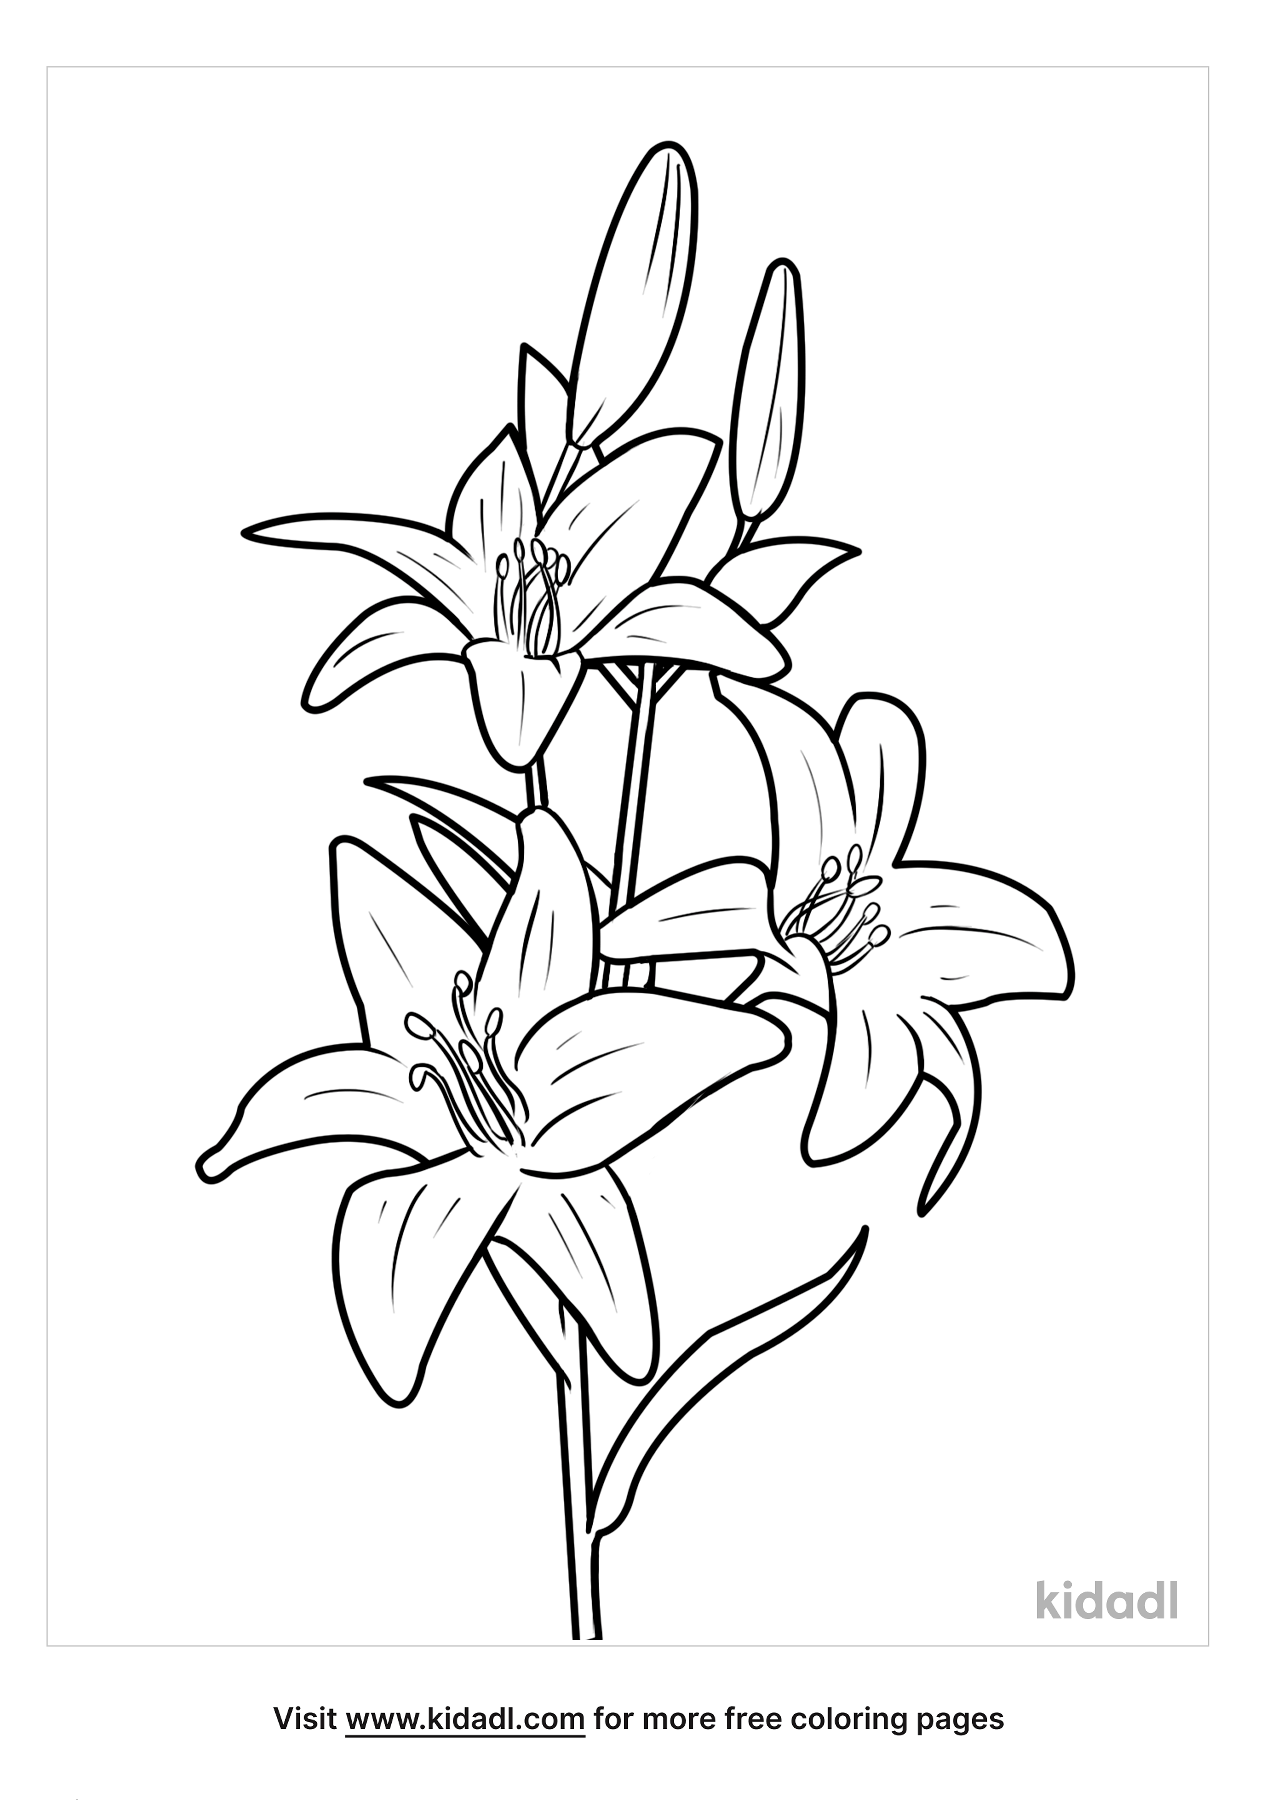 lily-flower-coloring-pages-best-flower-site